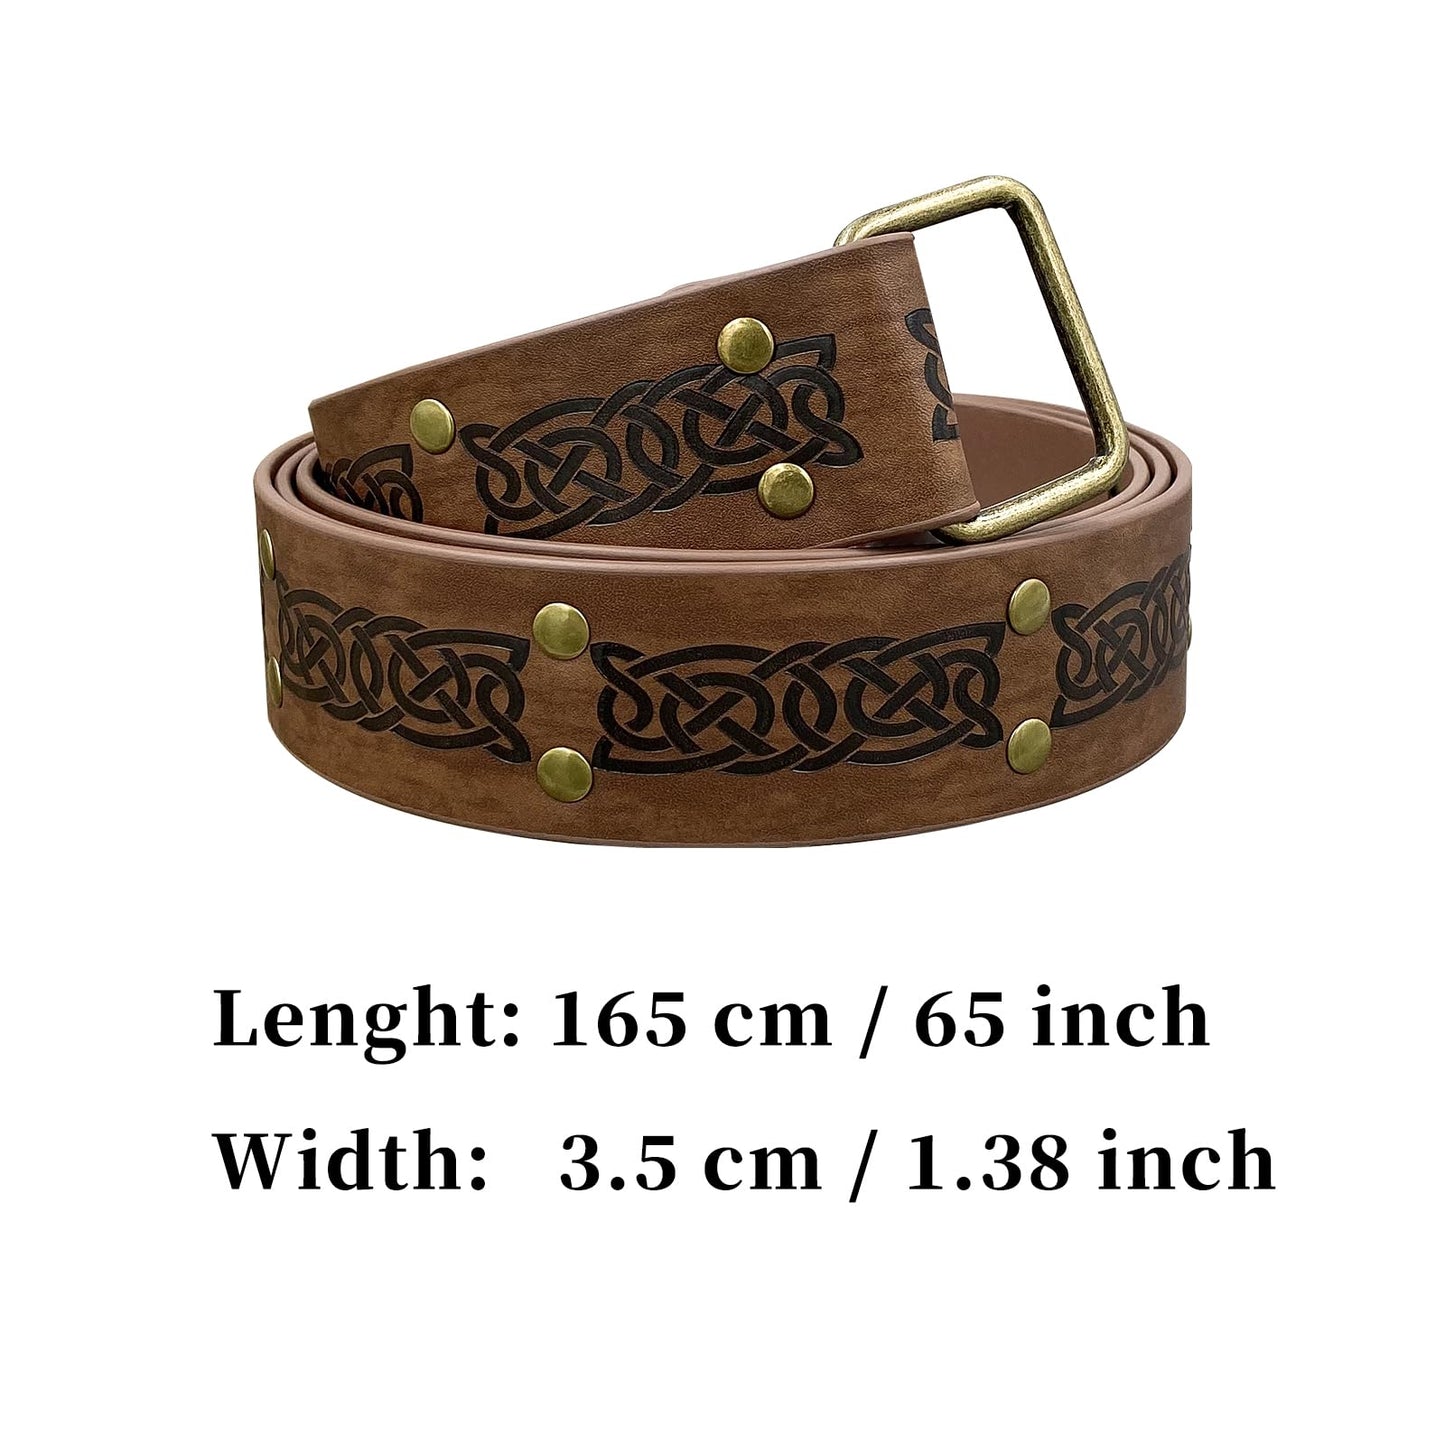 HiiFeuer Medieval Embossed Square Buckle Belt,Retro Middle Ages Faux Leather Mercenary Knight Belt,For Ren Faire LARP Cosplay Brown a